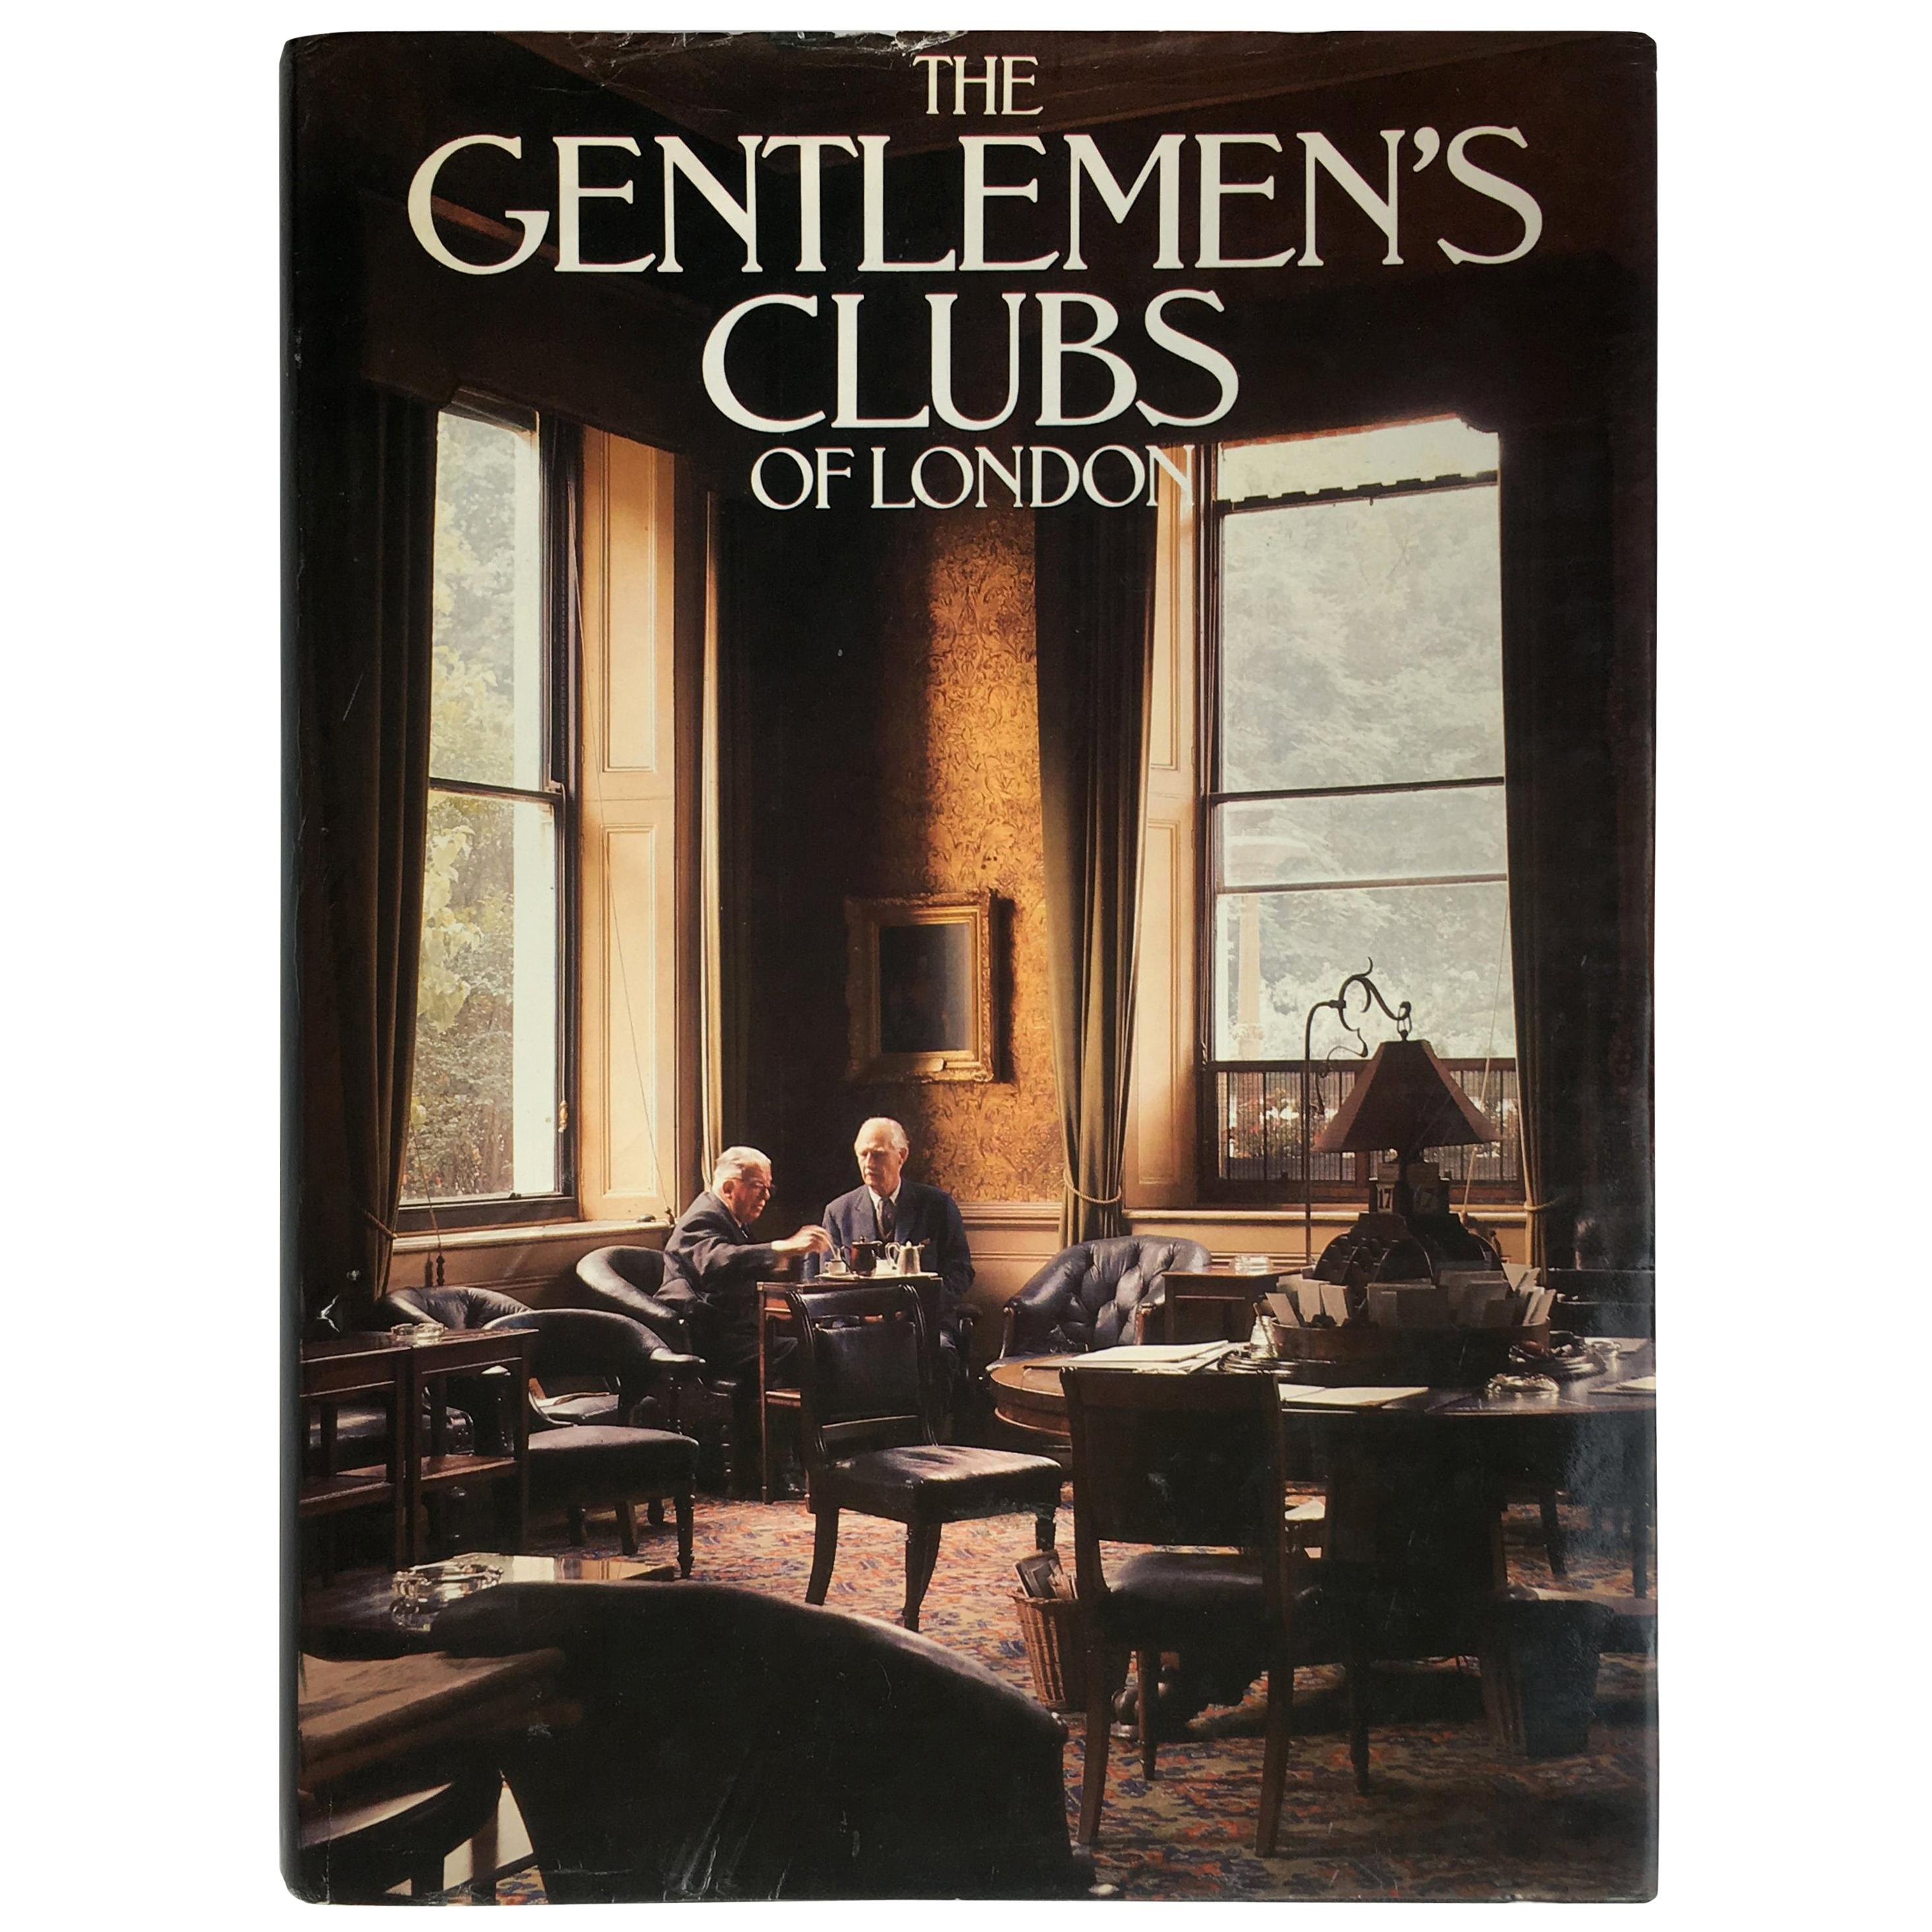 The Gentleman’s Clubs of London, Anthony Lejeune & Malcolm Lewis Book